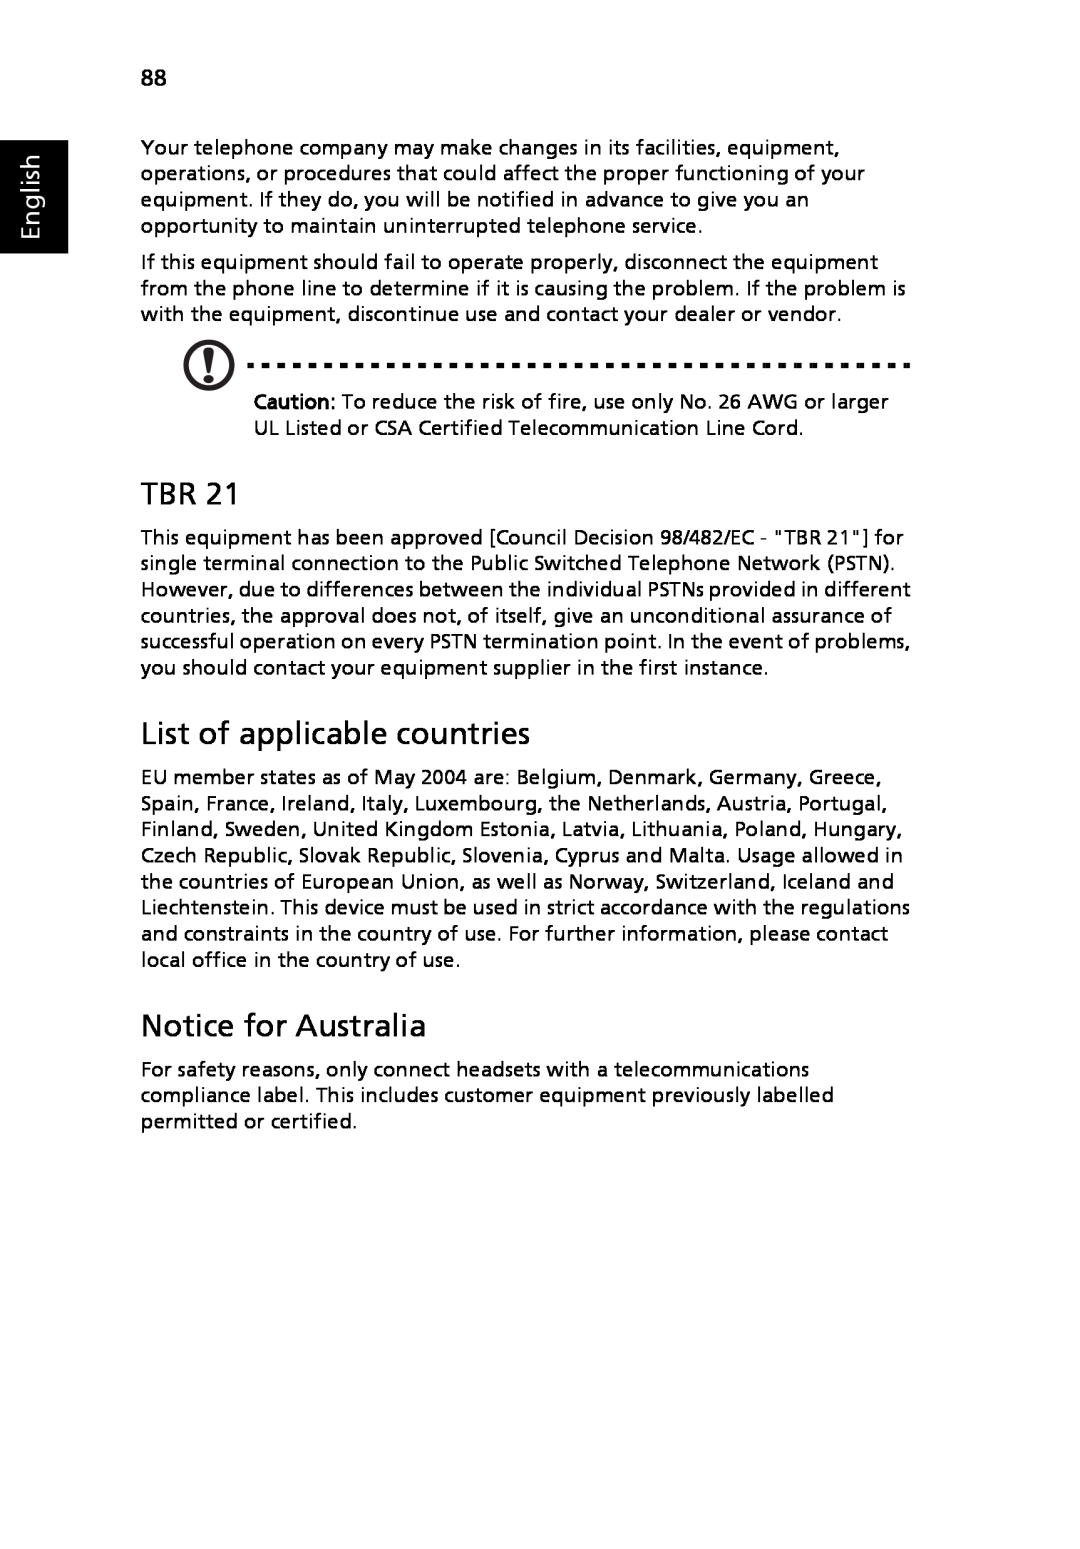 Acer 5520G, 5220 manual List of applicable countries, Notice for Australia, English 